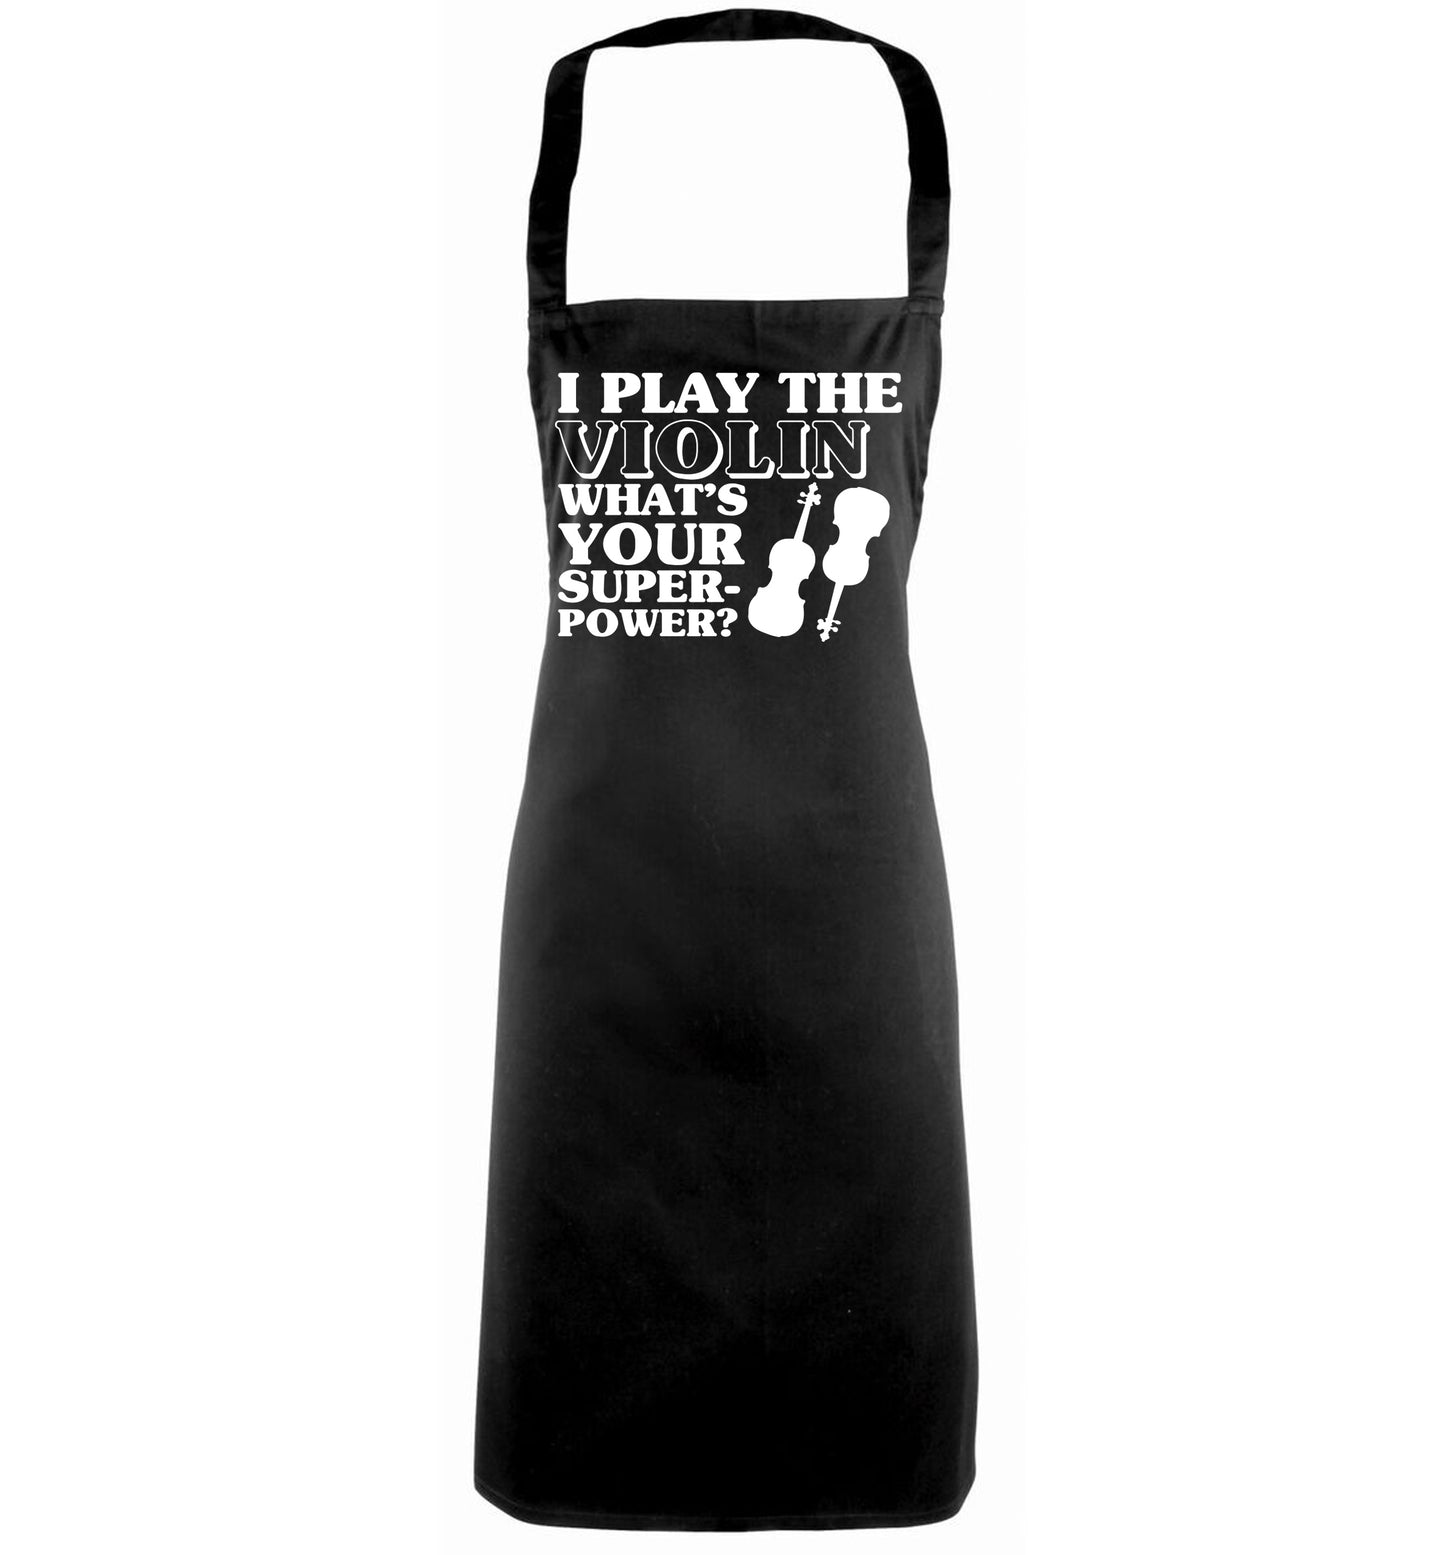 I Play Violin What's Your Superpower? black apron